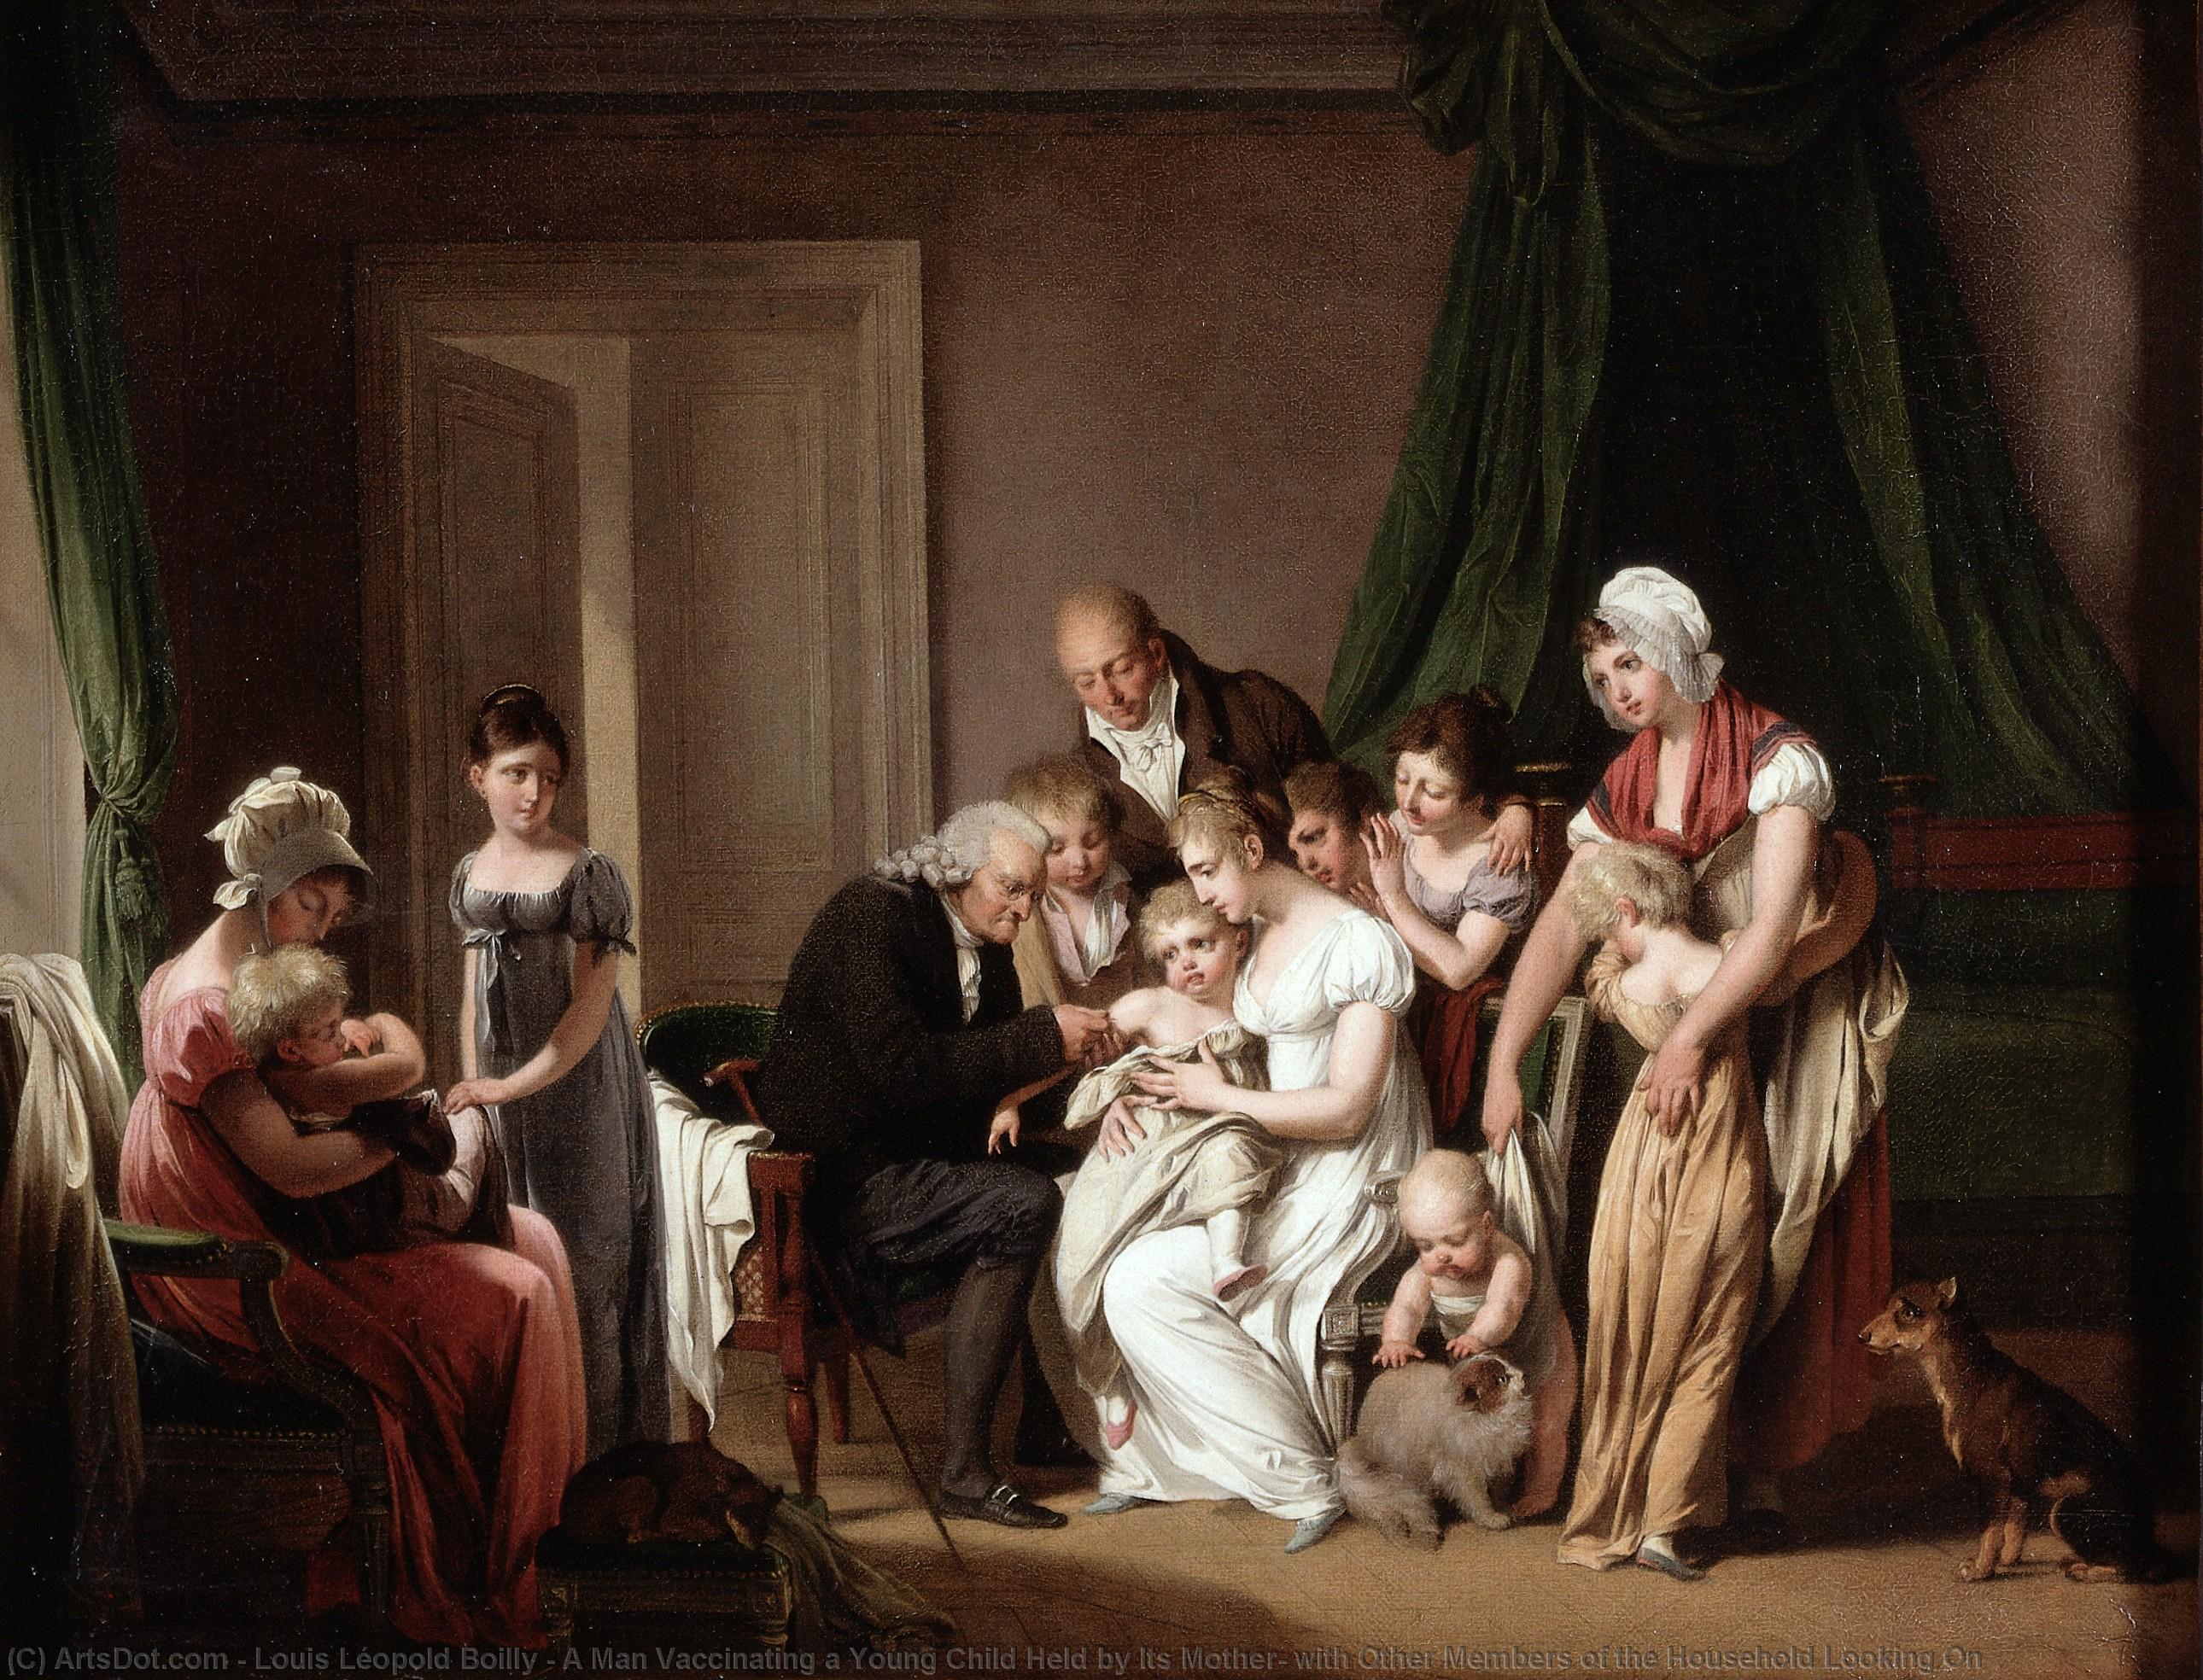 Buy Museum Art Reproductions A Man Vaccinating a Young Child Held by Its Mother, with Other Members of the Household Looking On, 1807 by Louis Léopold Boilly (1761-1845, France) | ArtsDot.com